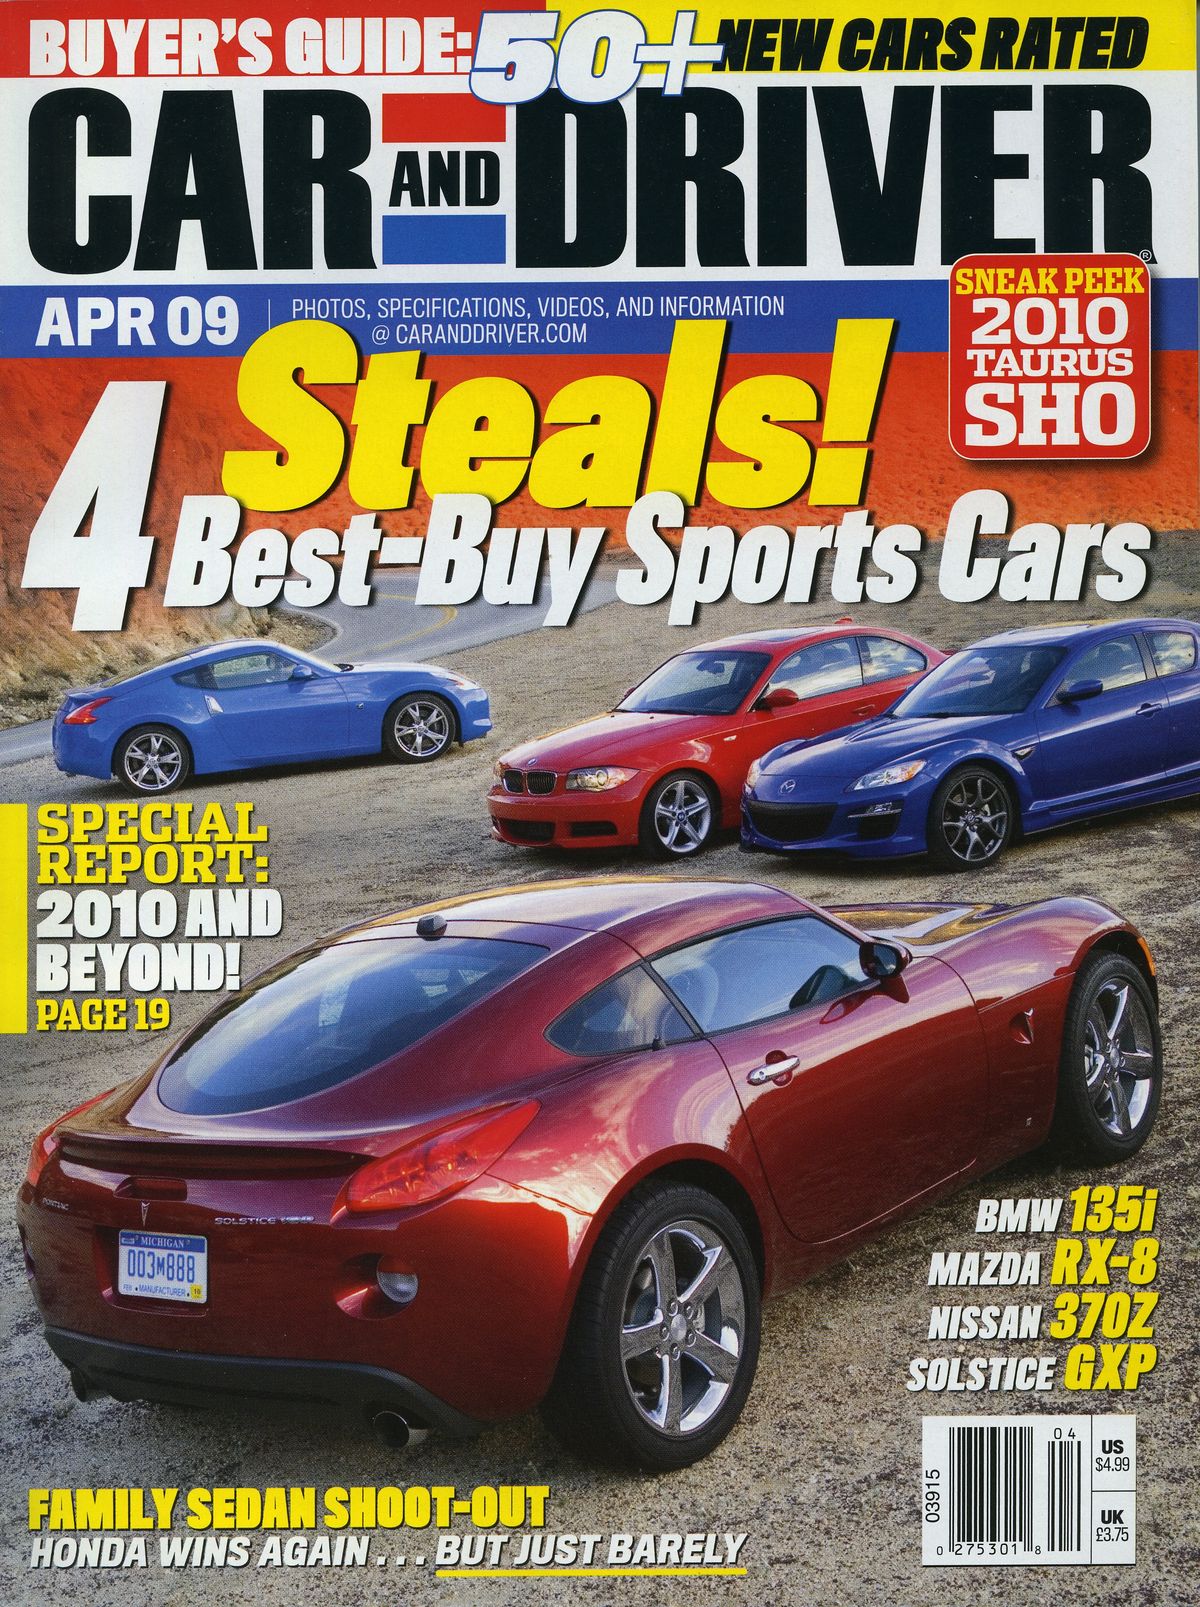 april 2009 car and driver magazine cover